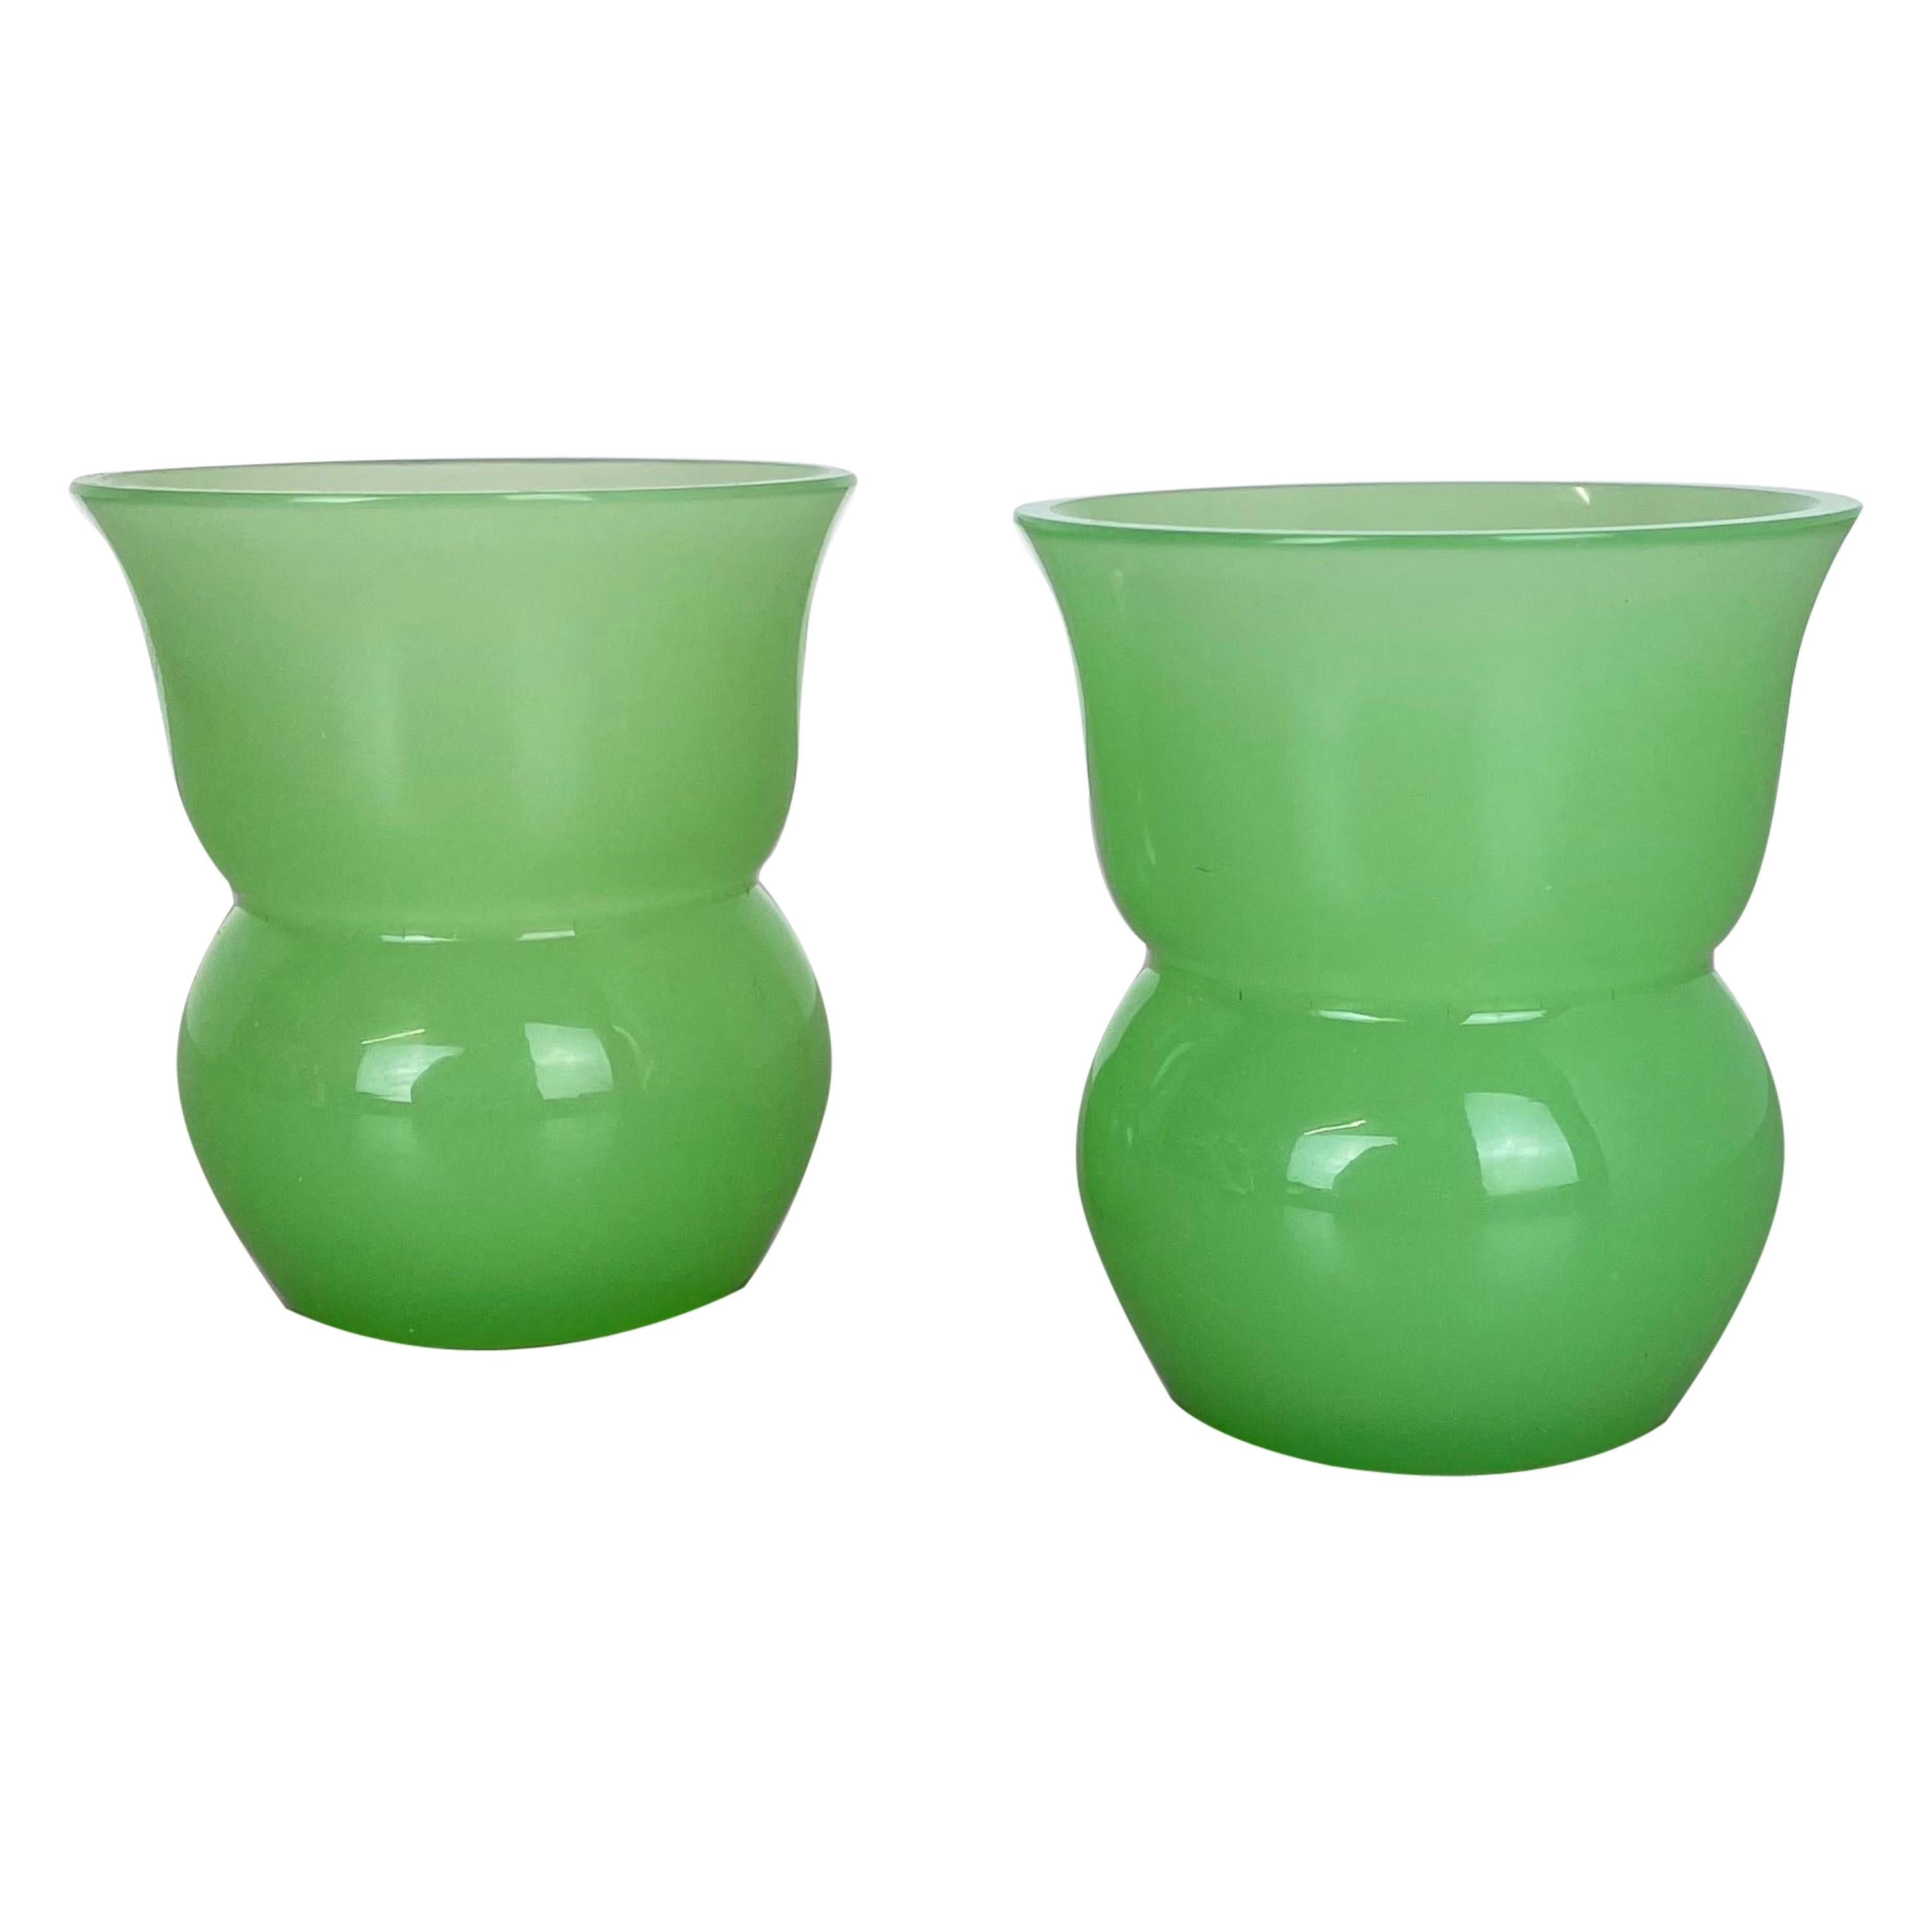 Set of 2 Green New Old Stock Murano Opaline Glass Vases by Gino Cenedese, 1960s